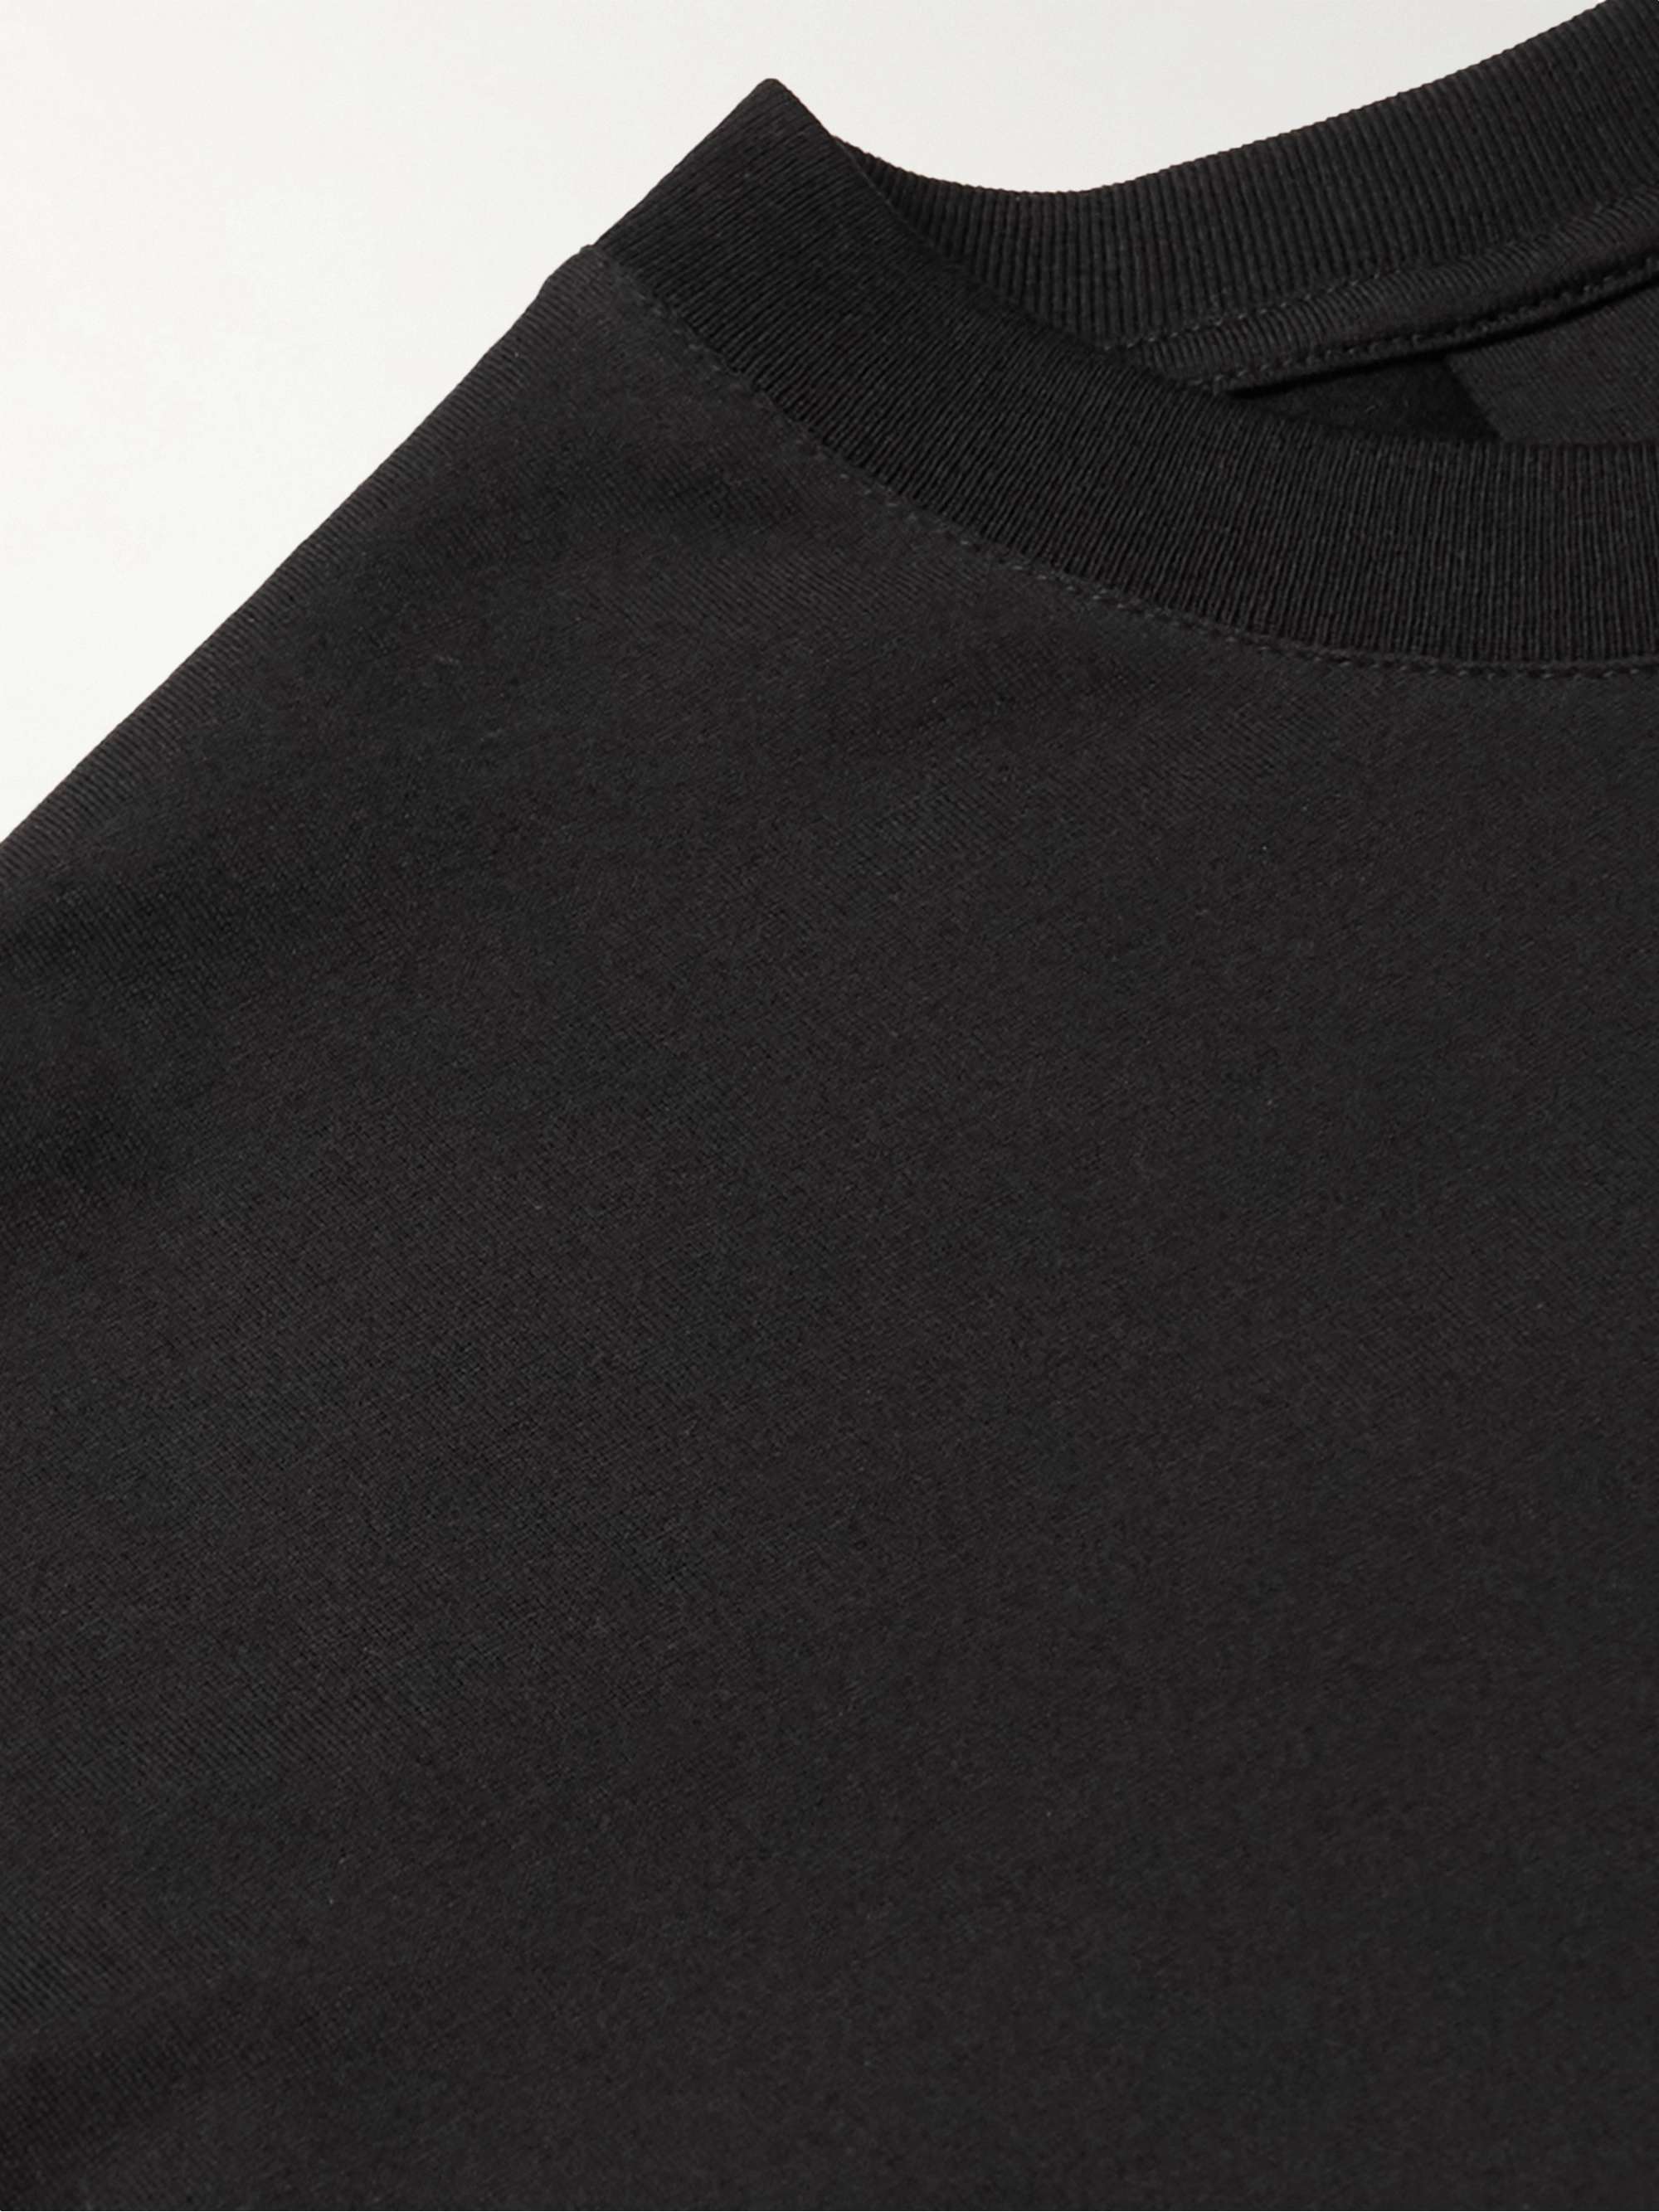 GIVENCHY Logo-Embroidered Cotton-Jersey T-Shirt